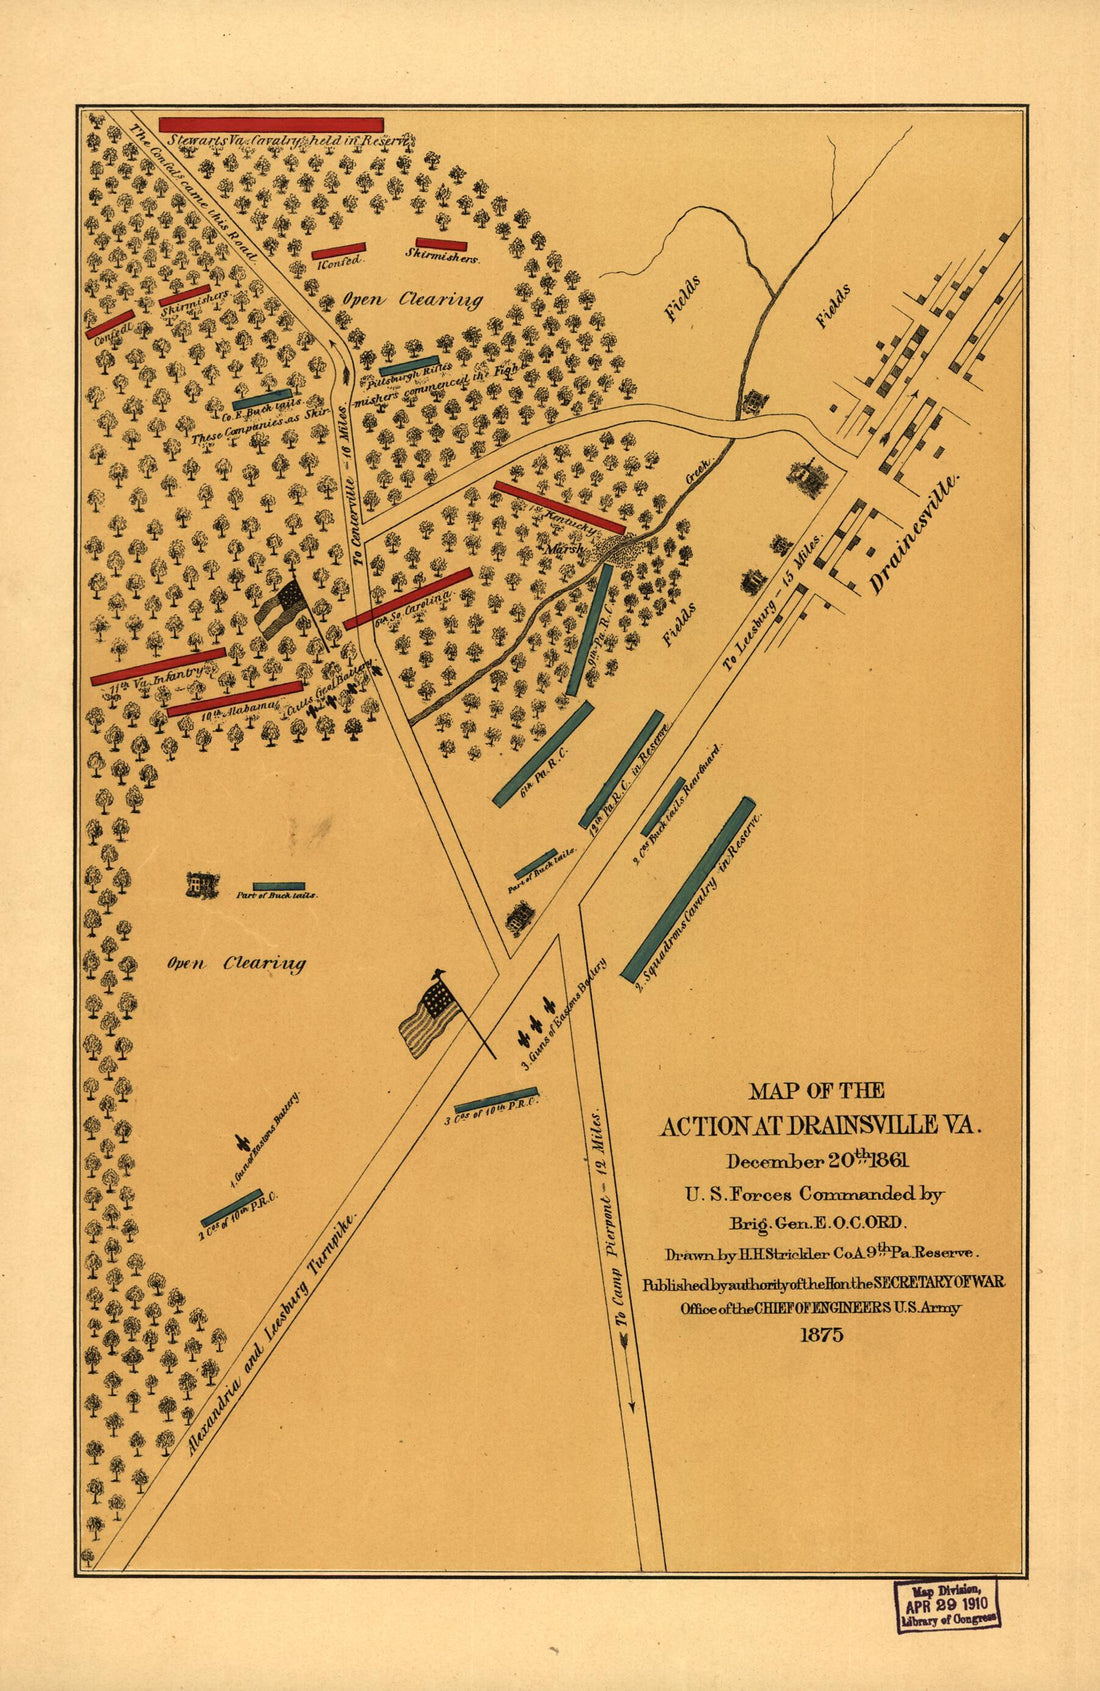 This old map of Map of the Action at Drainsville, Va., December 20th from 1861. U.S. Forces Commanded by Brig Gen. E. O. C. Ord was created by H. H. Strickler in 1861